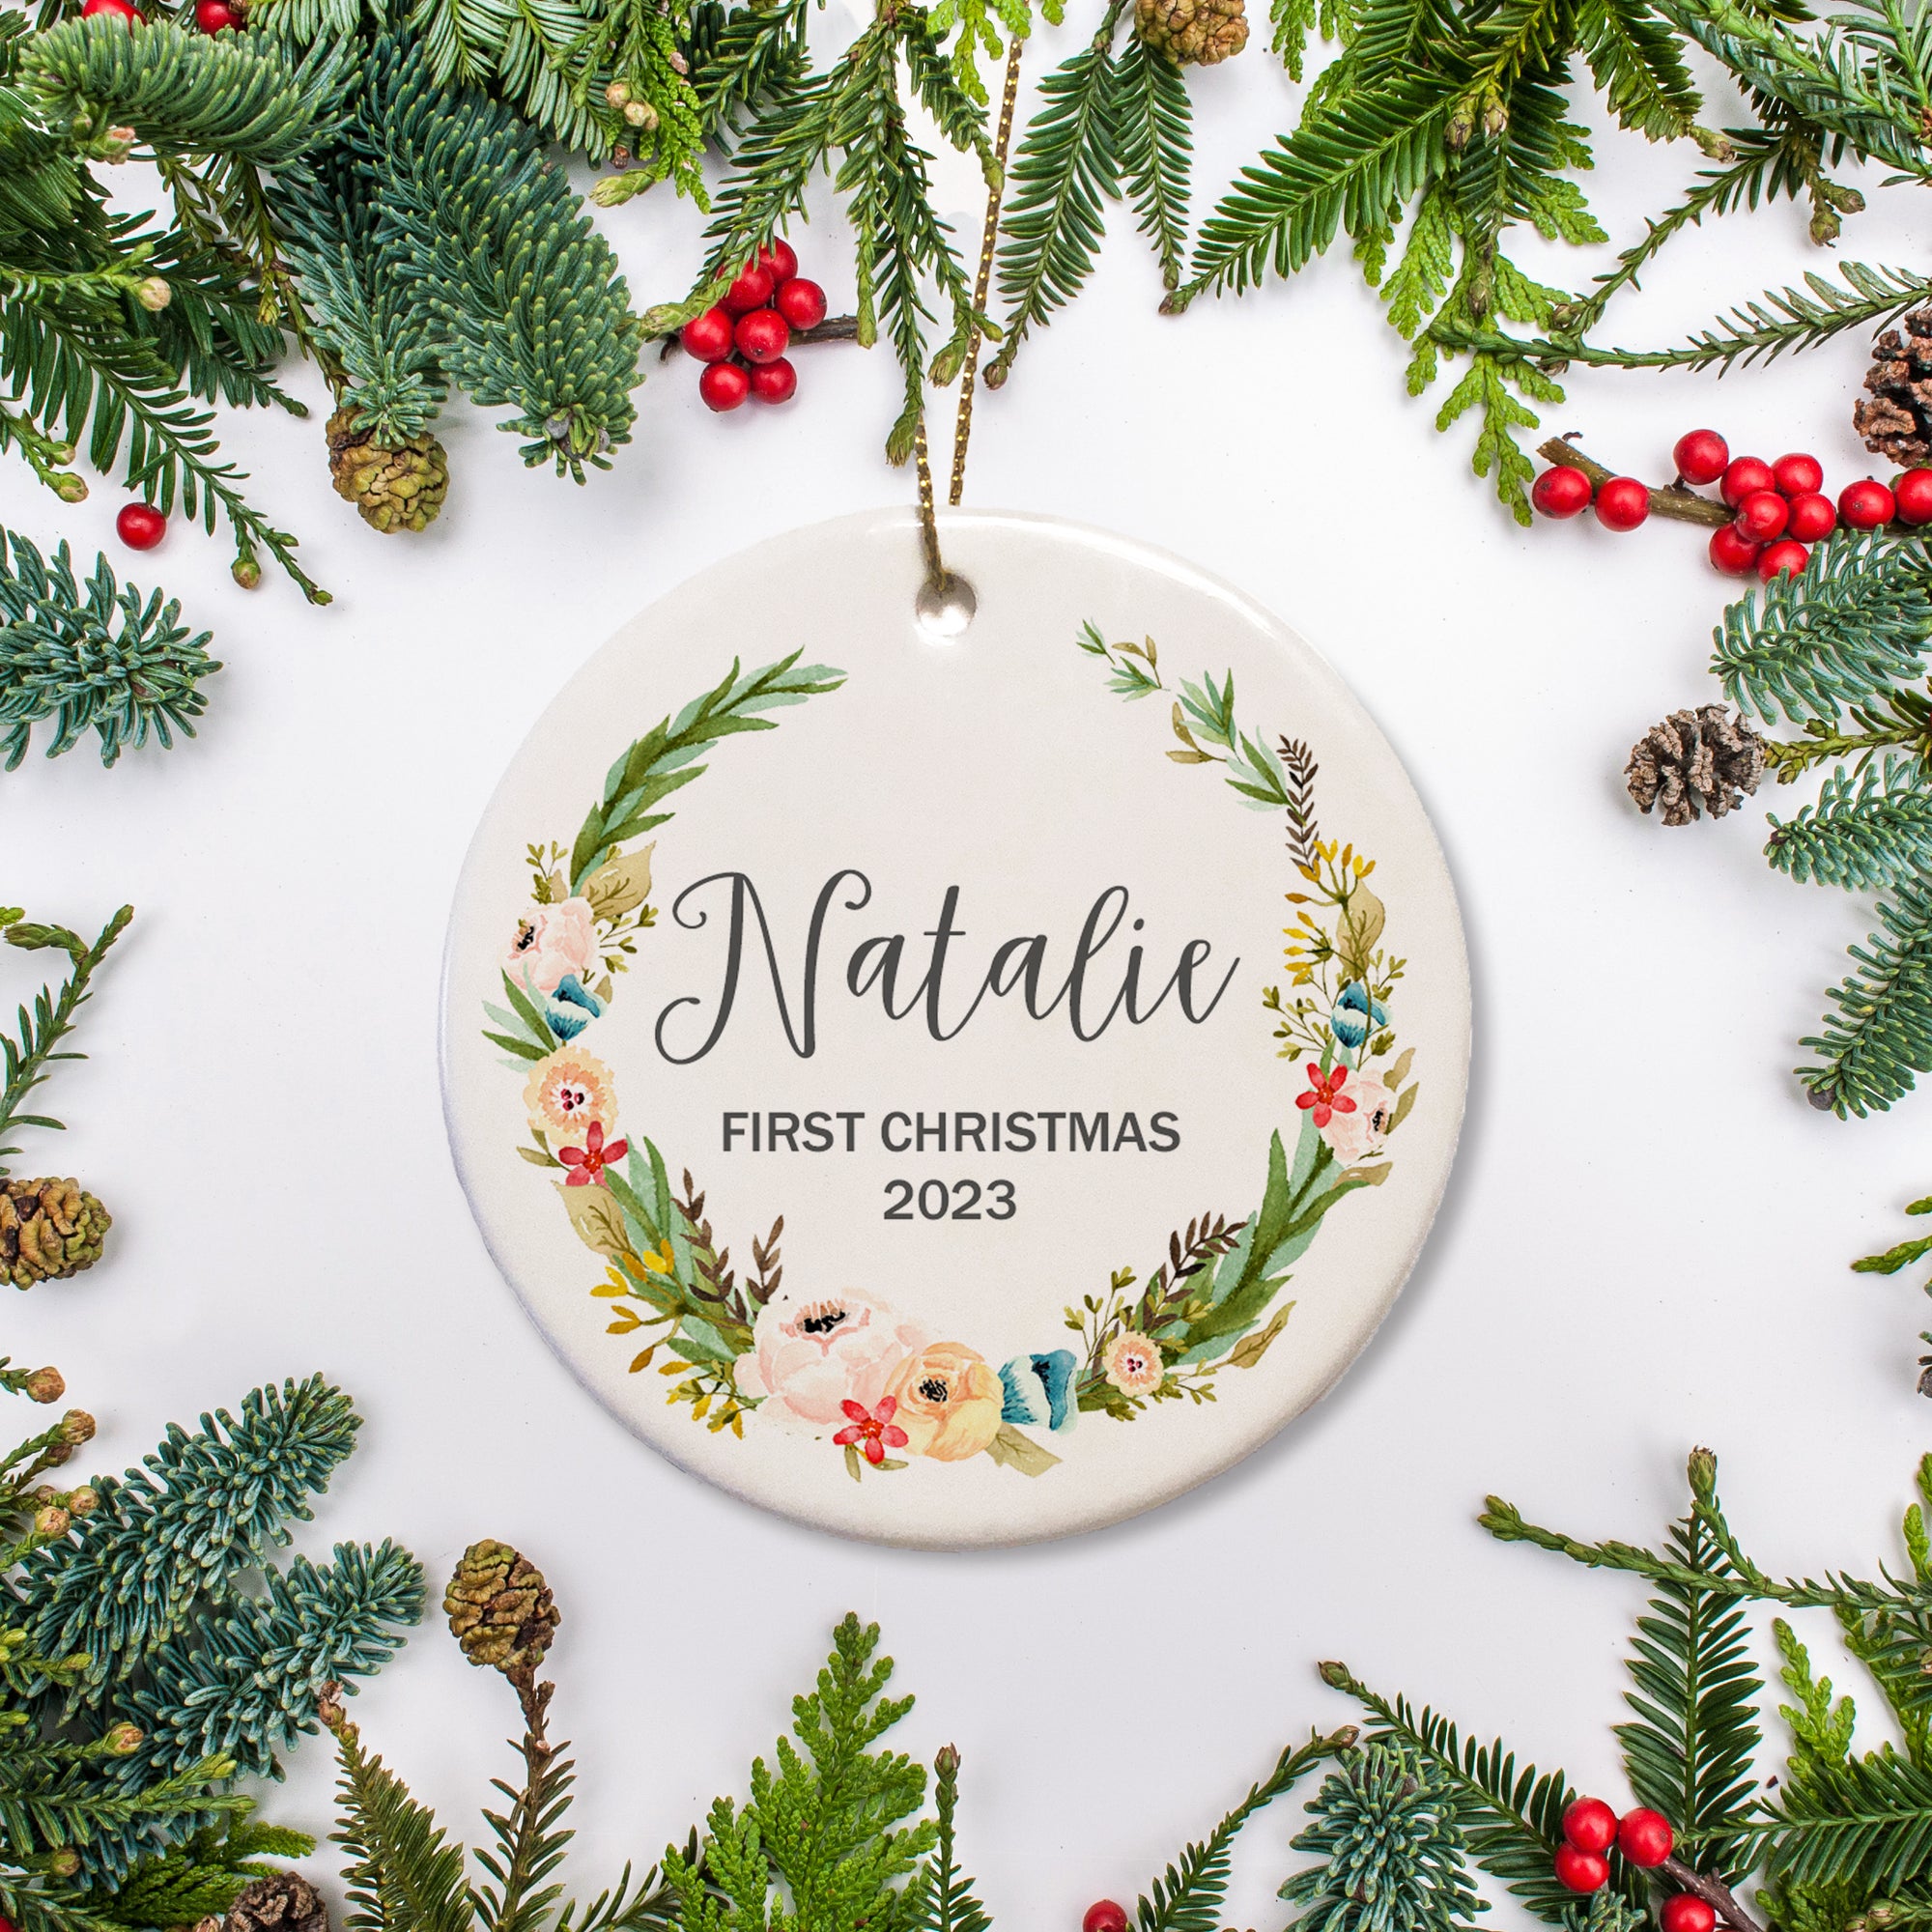 Personalized Christmas Ornament with name and year of your choice for baby's first Christmas, surrounded by olive wreath with blossom flowers throughout. | PIPSY.COM